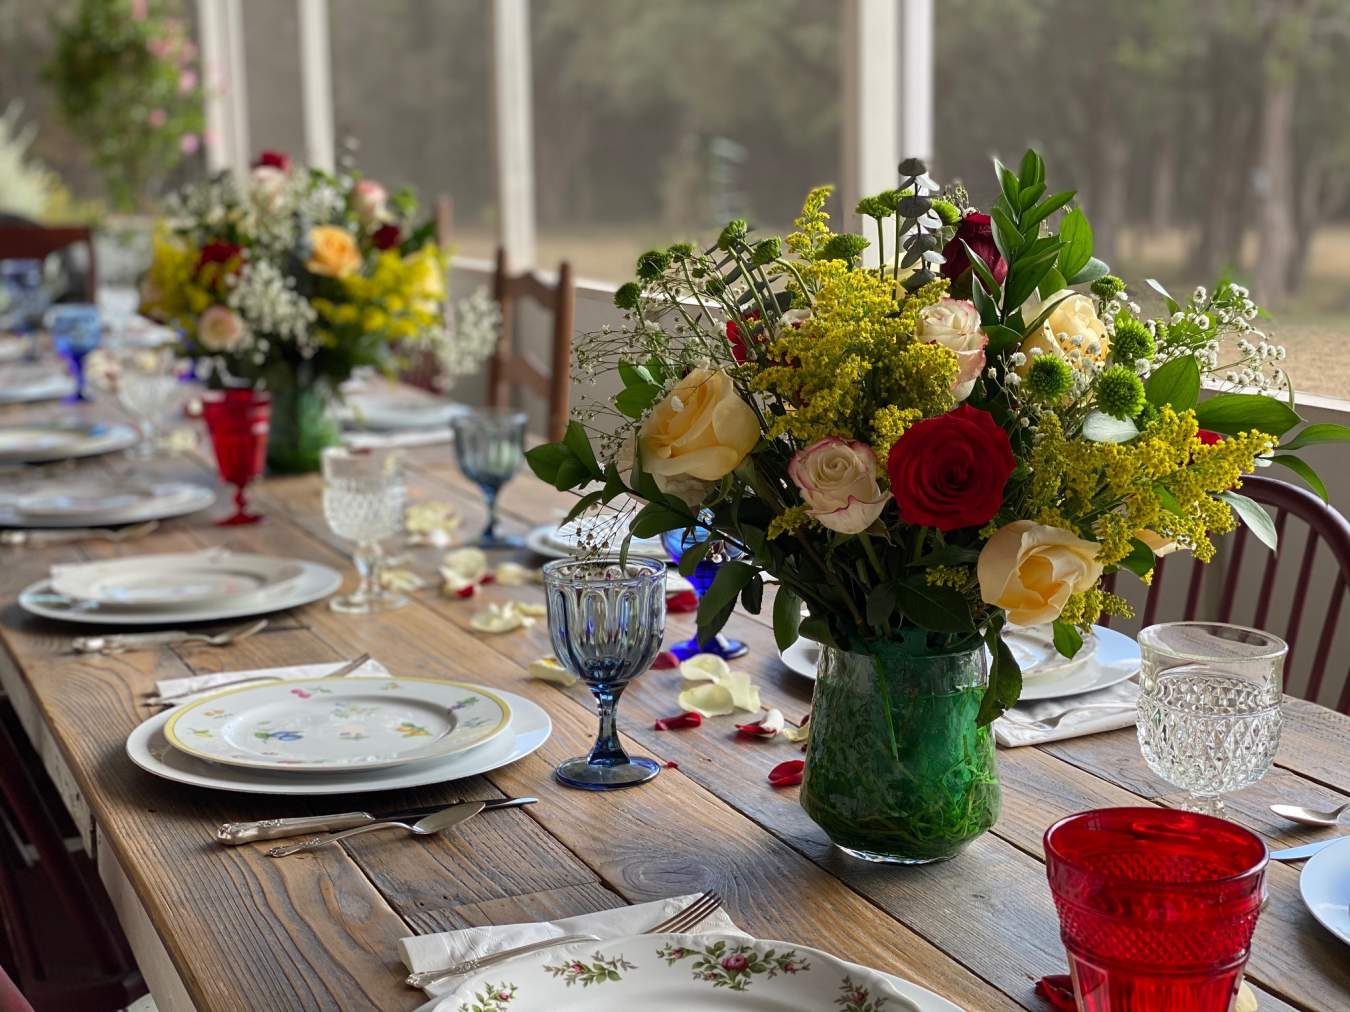 A beautifully appointed farmhouse table set with floral China plates, colorful vintage goblets and two bouquets of roses.